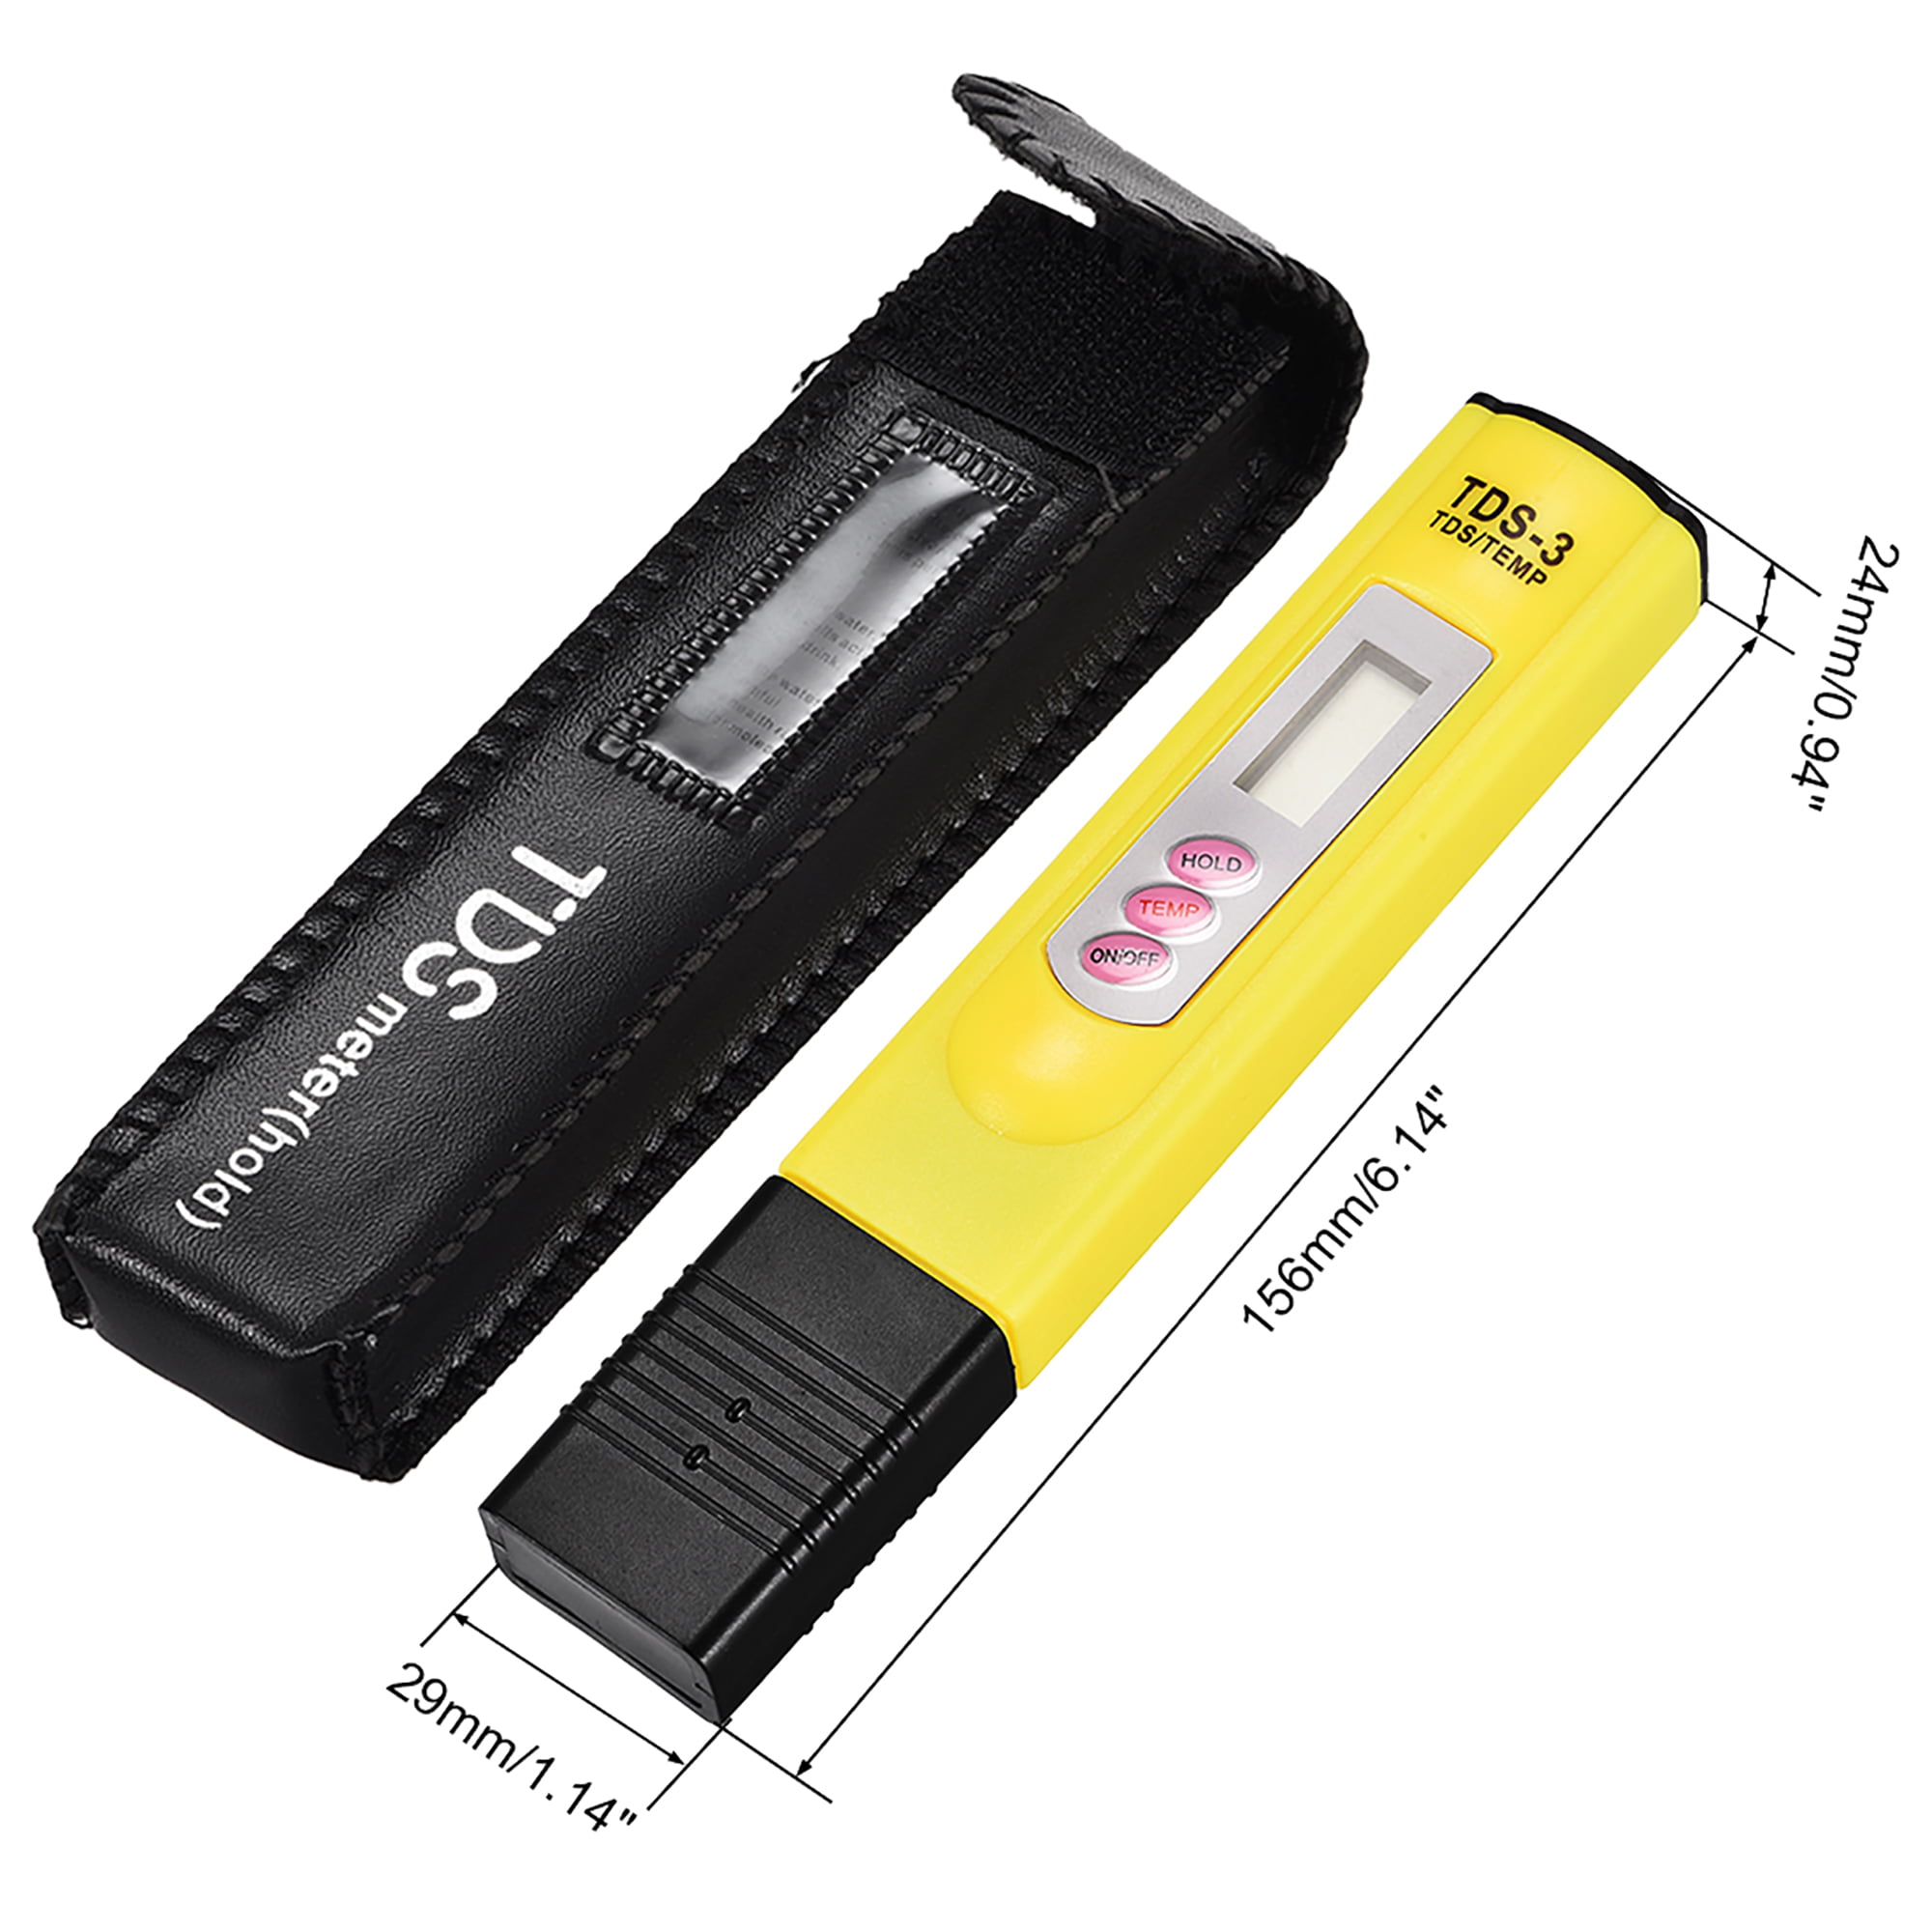 TDS 3 PPM Conductivity Meter for Water Aquarium Pool w Leather Case Yellow 